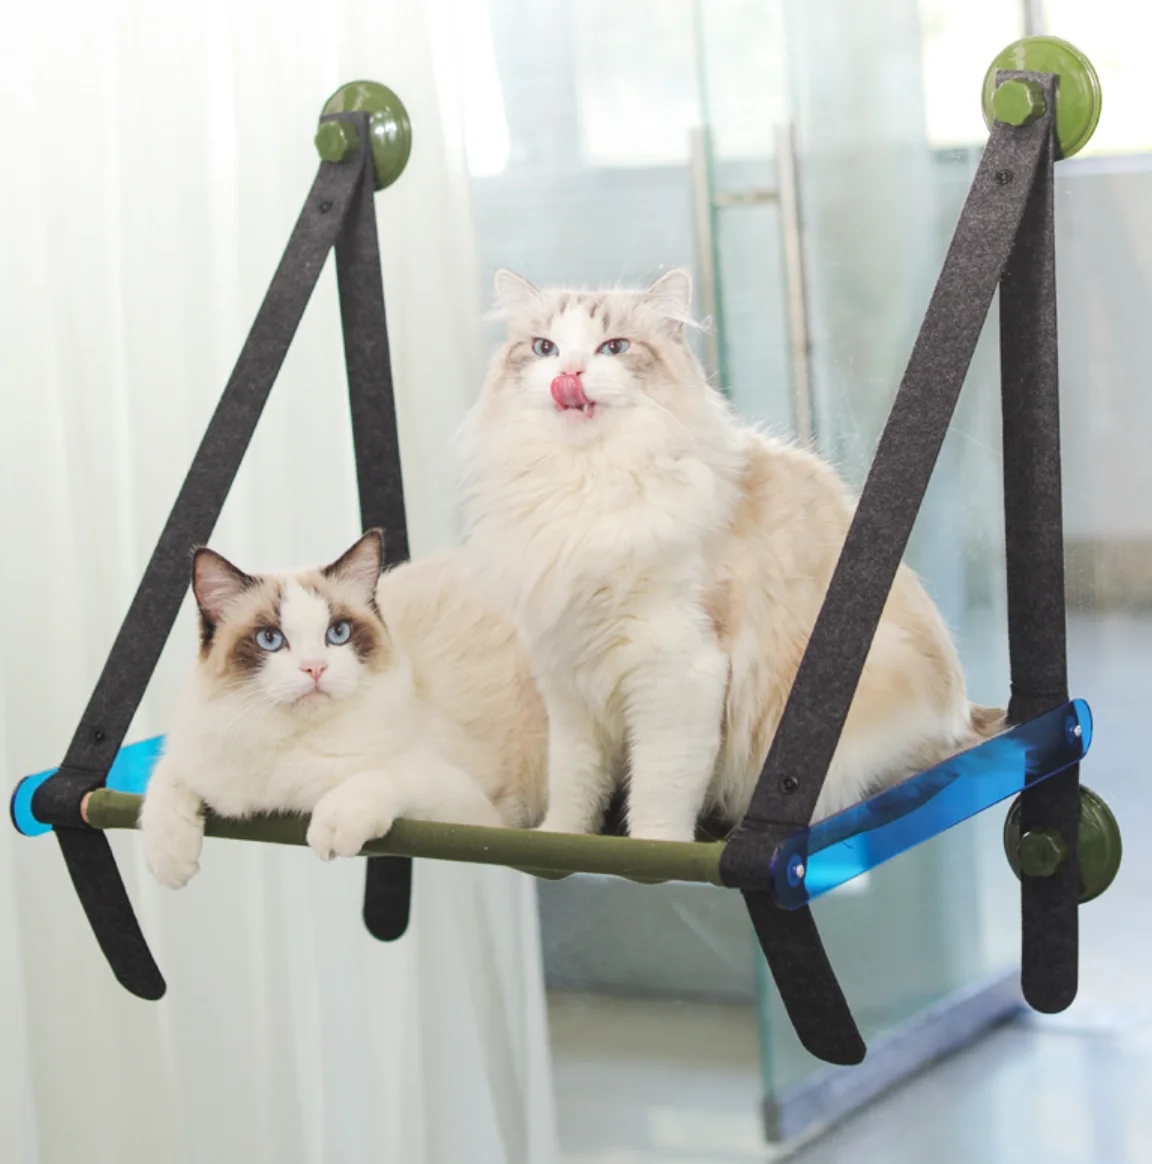 

Safety wooden Felt Acrylic Suction Cup Cat Window Hammock Bed for Sunbathing, Blue green